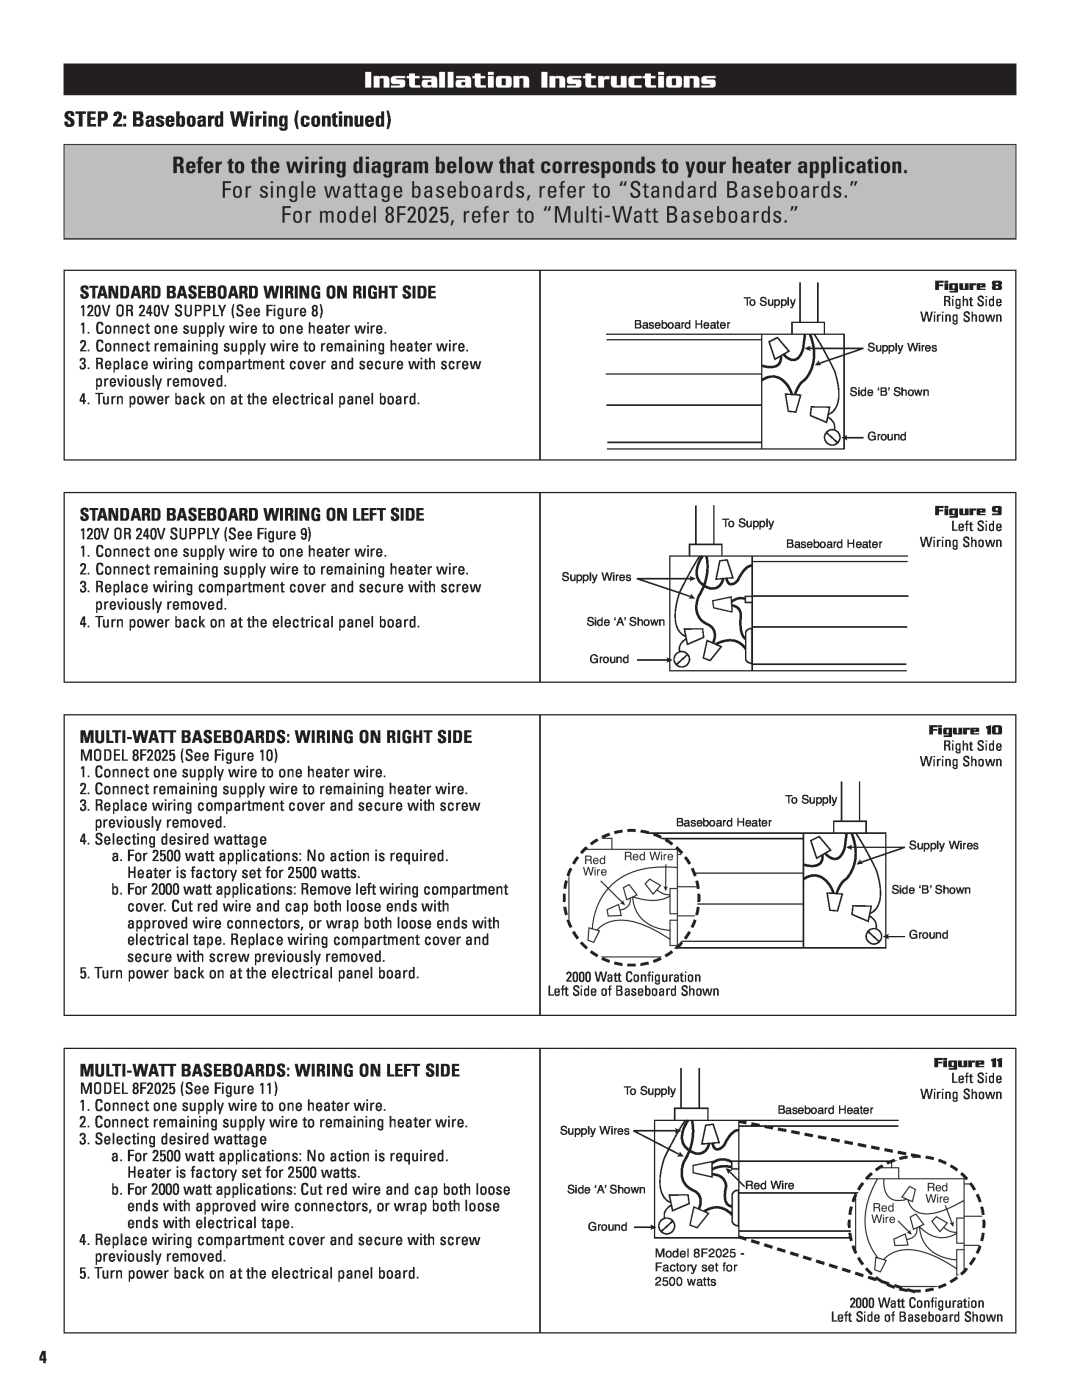 Cadet 5F1250-8, 4F1000 Installation Instructions, Baseboard Wiring continued, Standard Baseboard Wiring On Right Side 